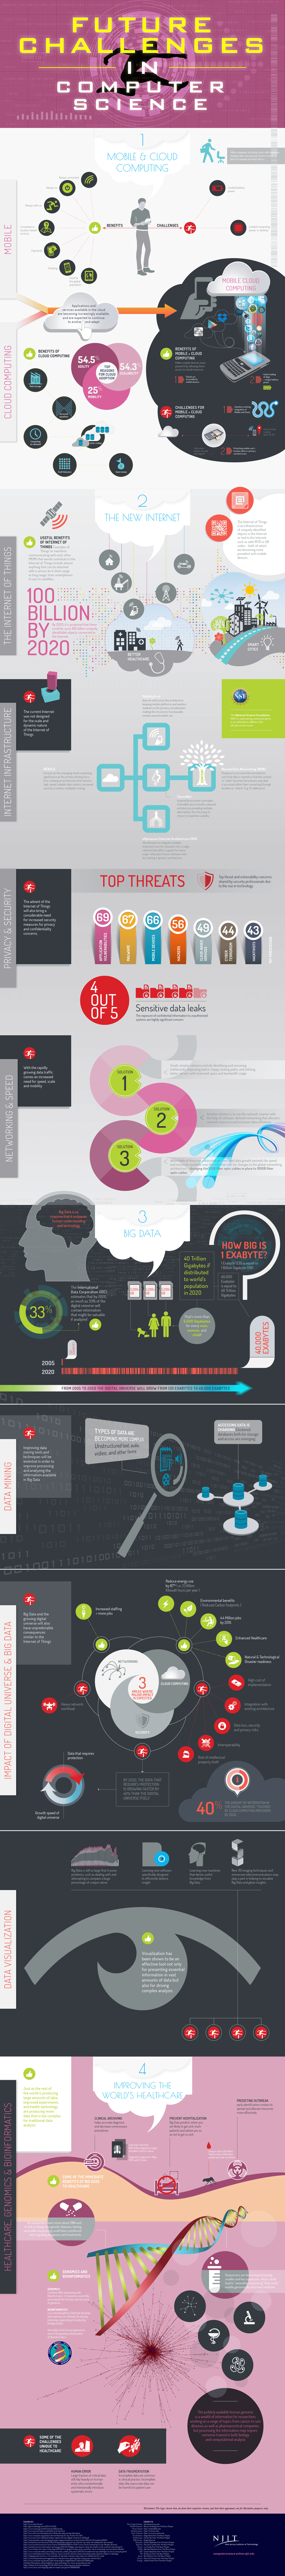 Massive Infographic on Future Challenges in Computer Science